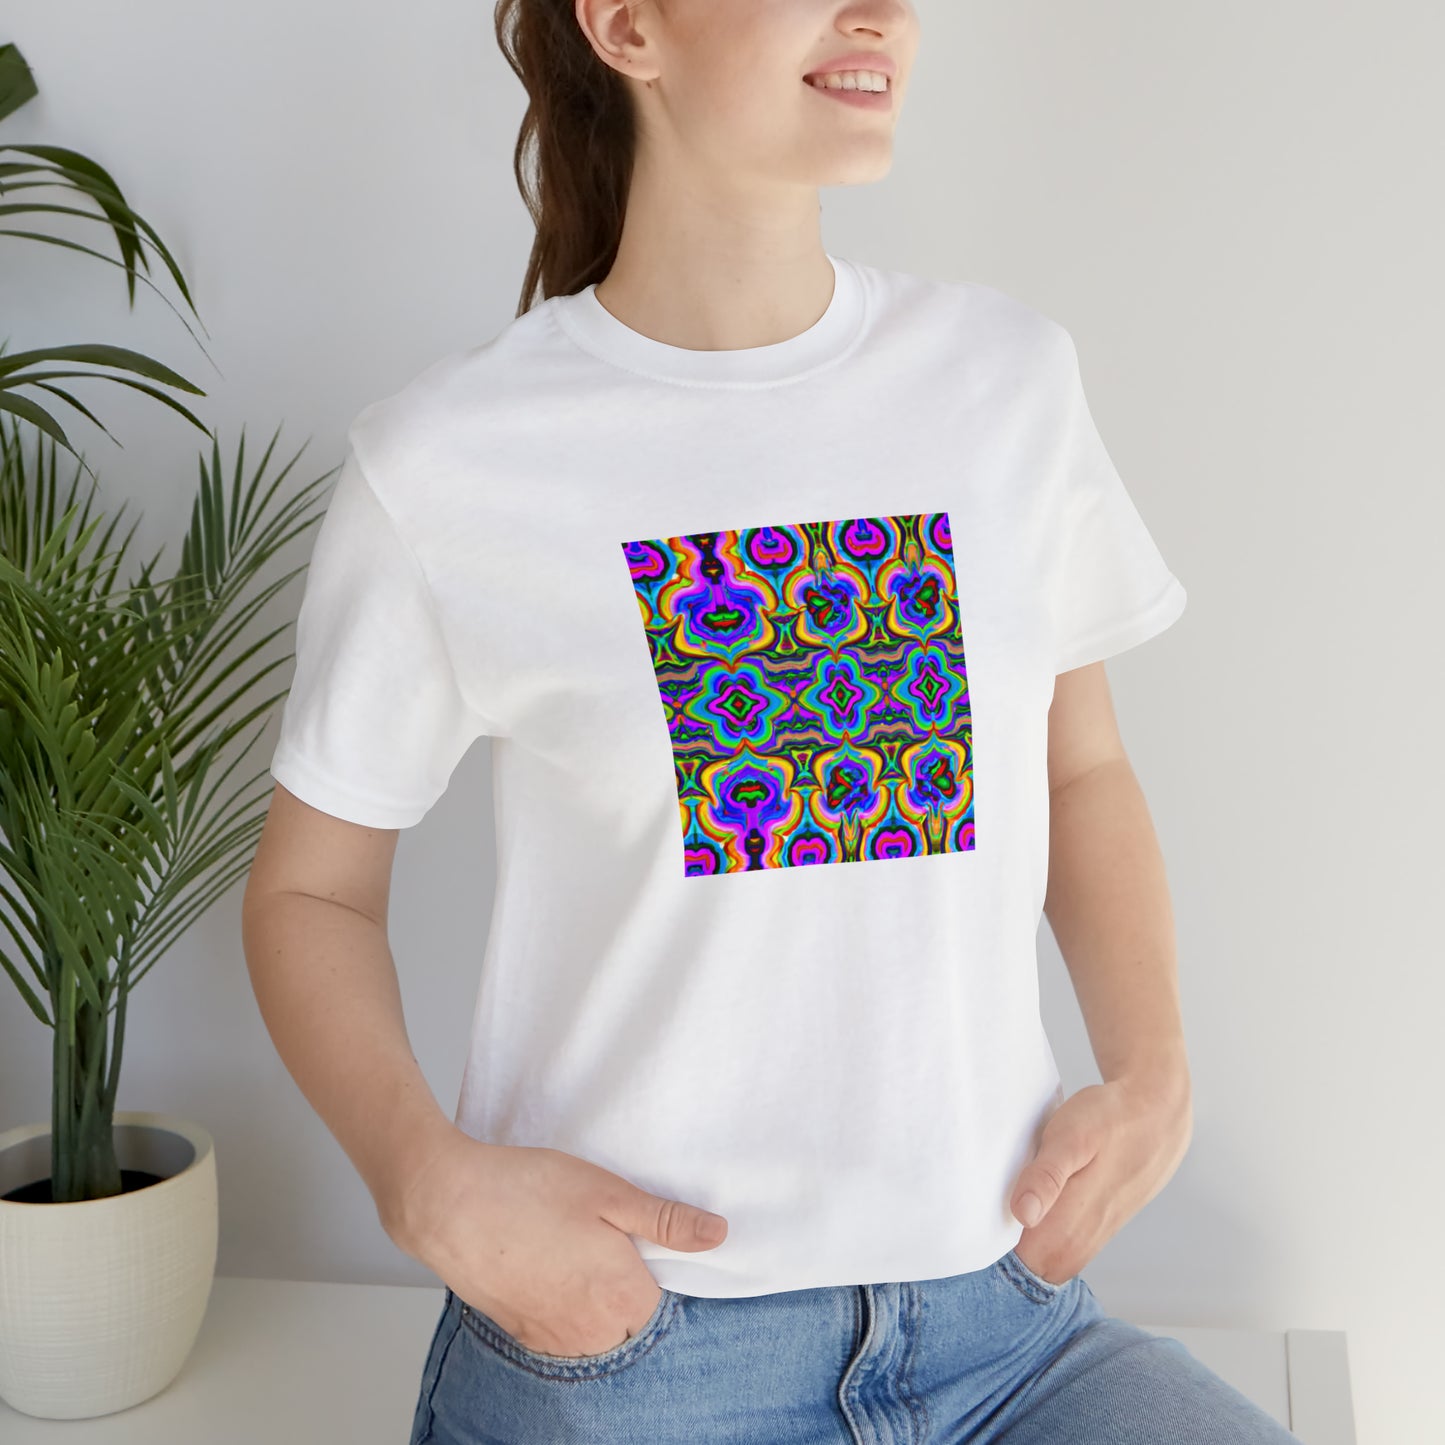 Jacques Lamont - Psychedelic Trippy Pattern Tee Shirt